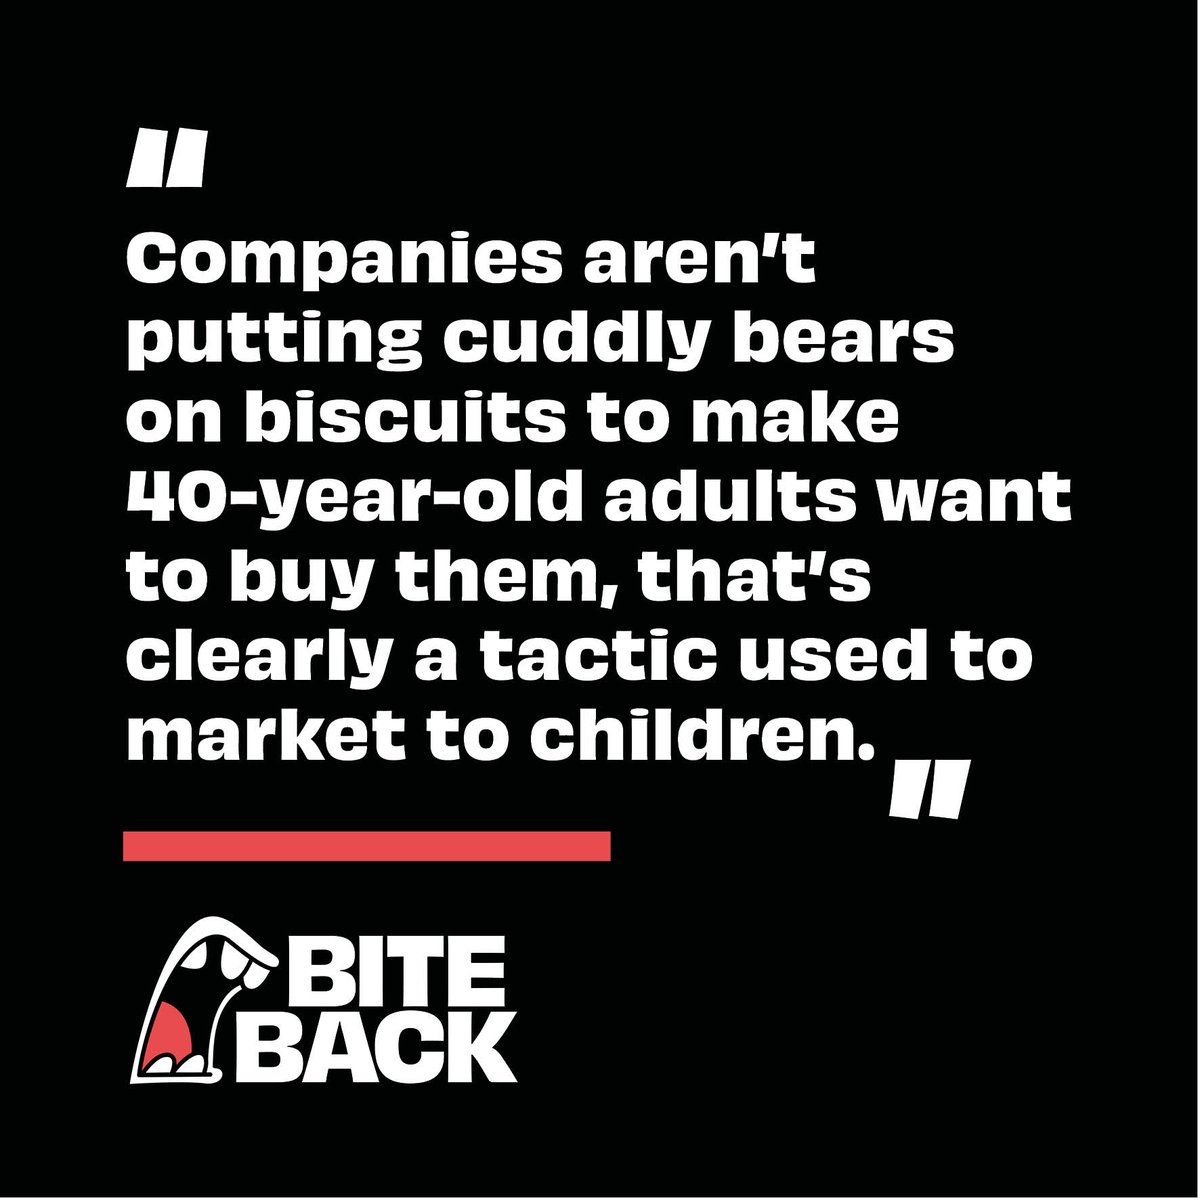 New research from @BiteBack2030 reveals 78% of products that appeal to children - think cuddly marketing & cartoons - made by the biggest global food companies are unhealthy.

Sign the open letter to call for change:
bb2030.co/5pVL #FuelUsDontFoolUs